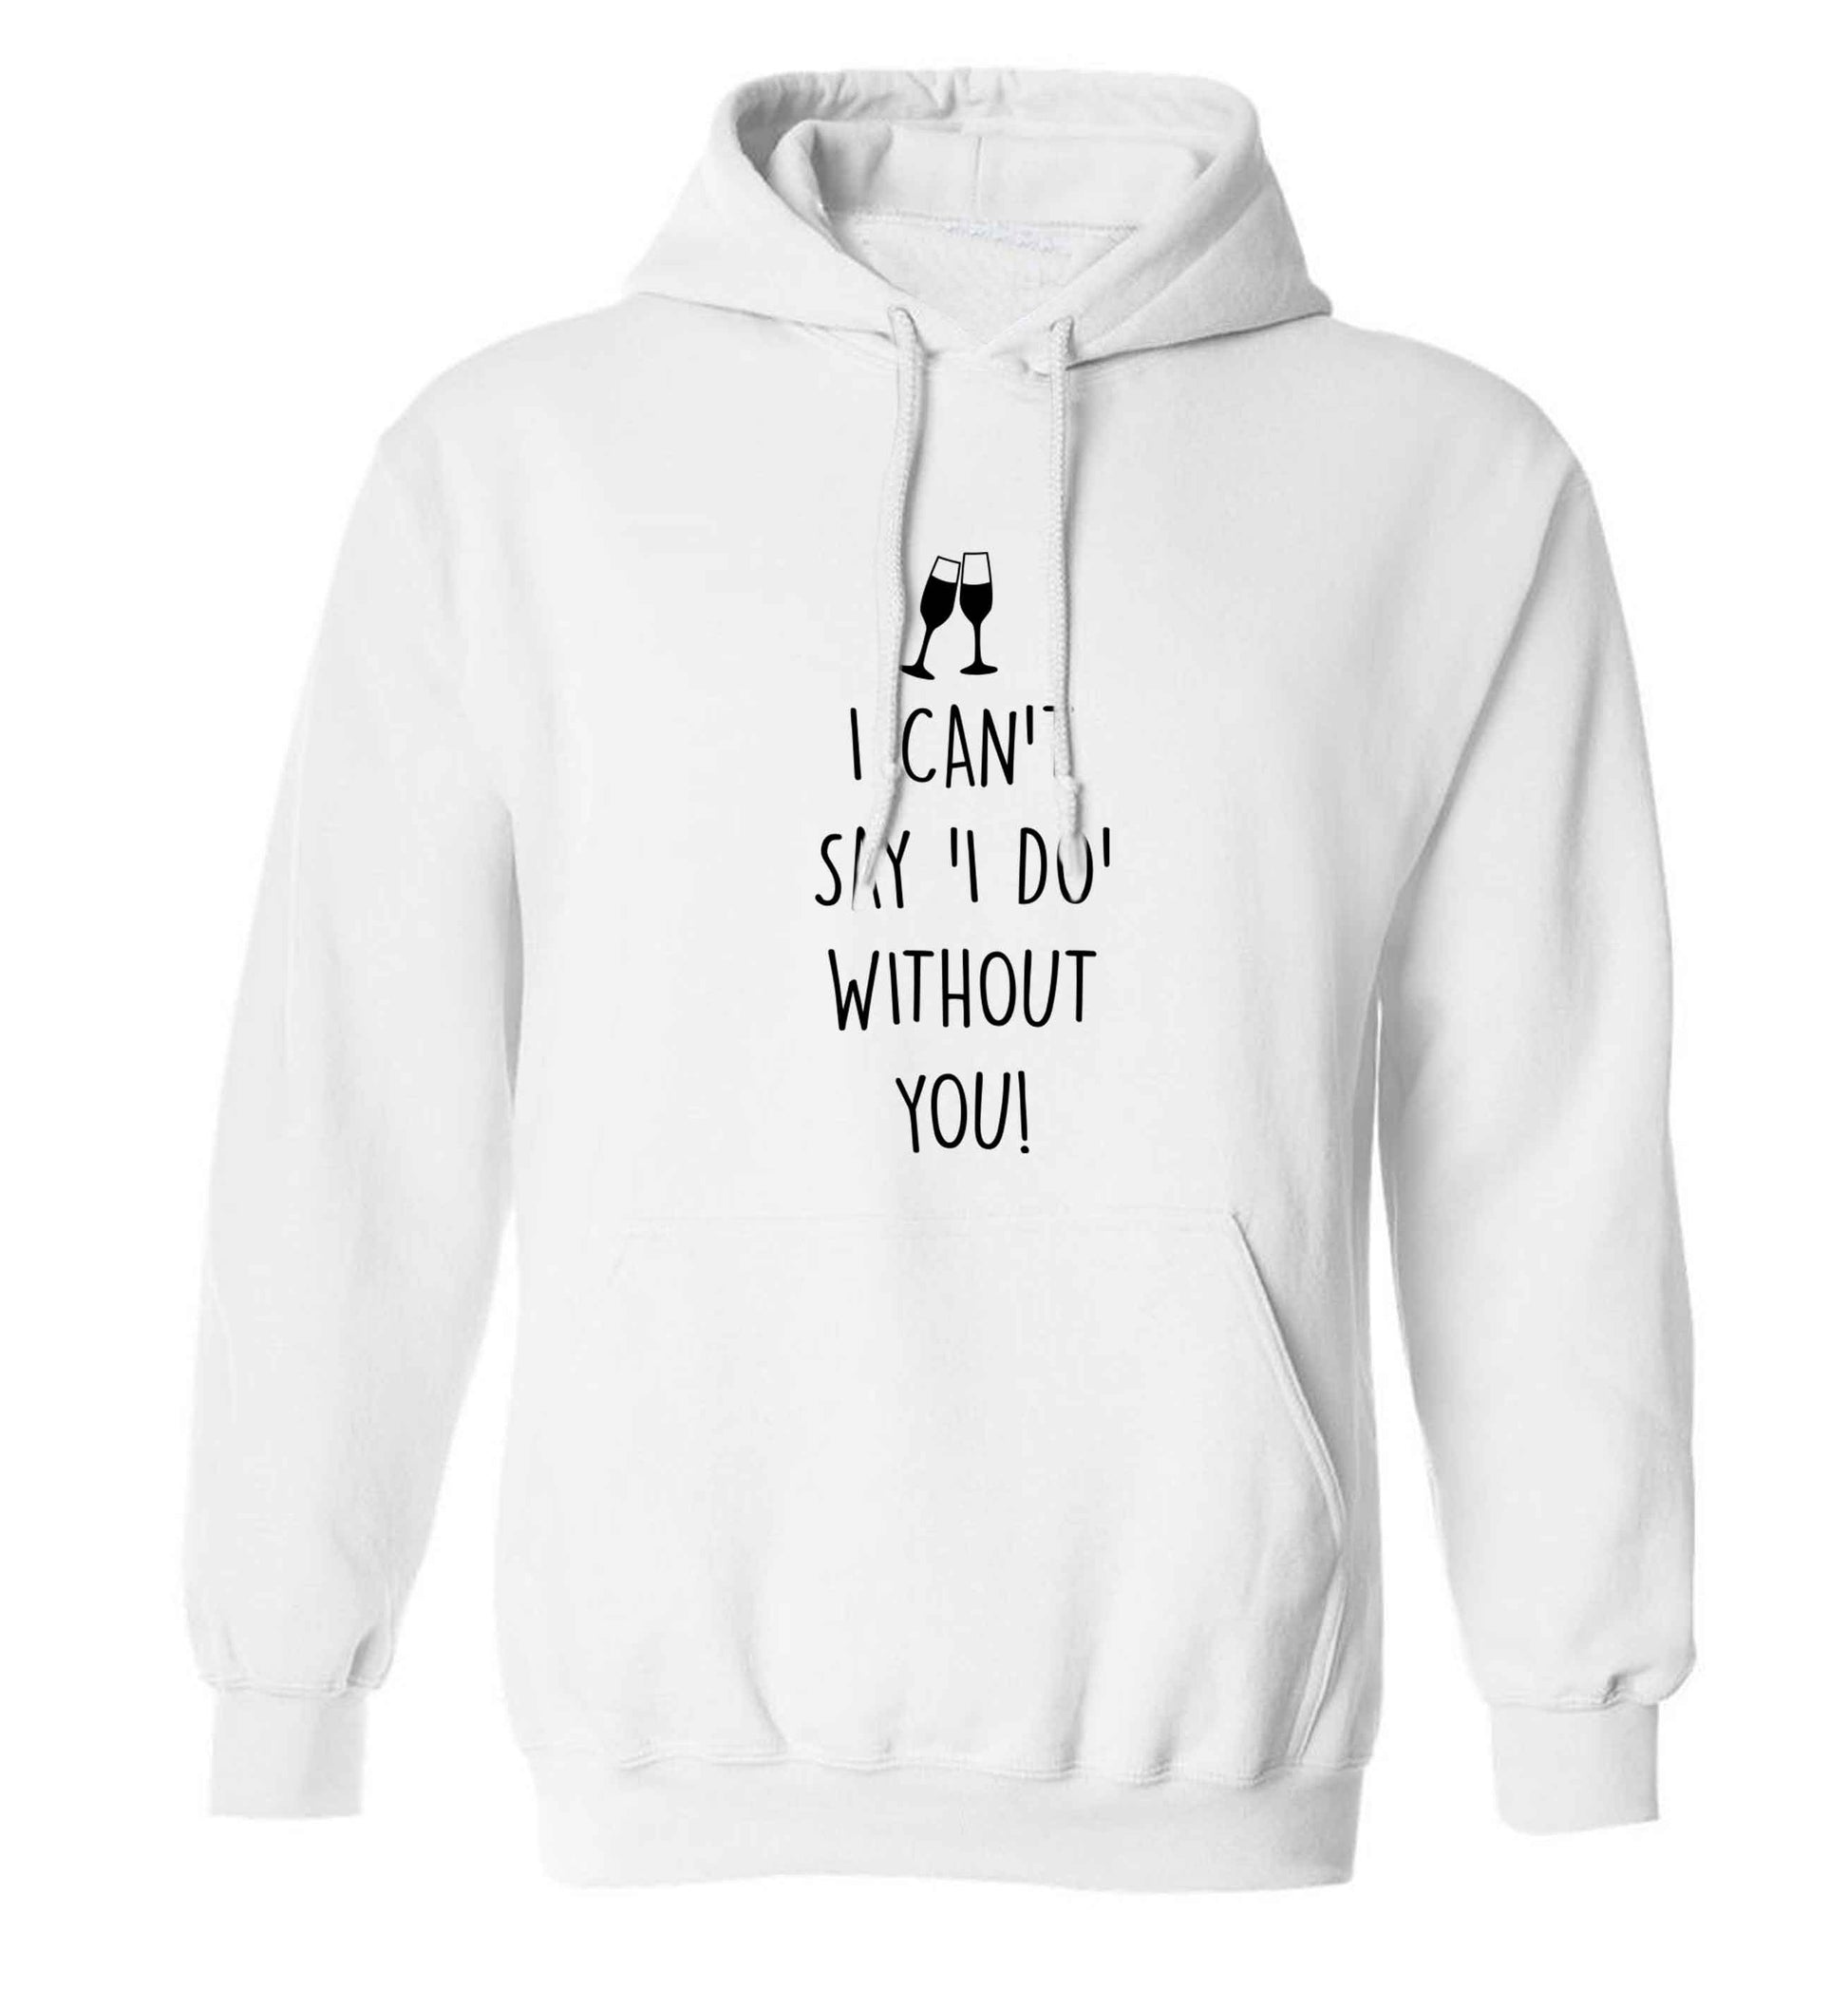 I can't say 'I do' without you! adults unisex white hoodie 2XL